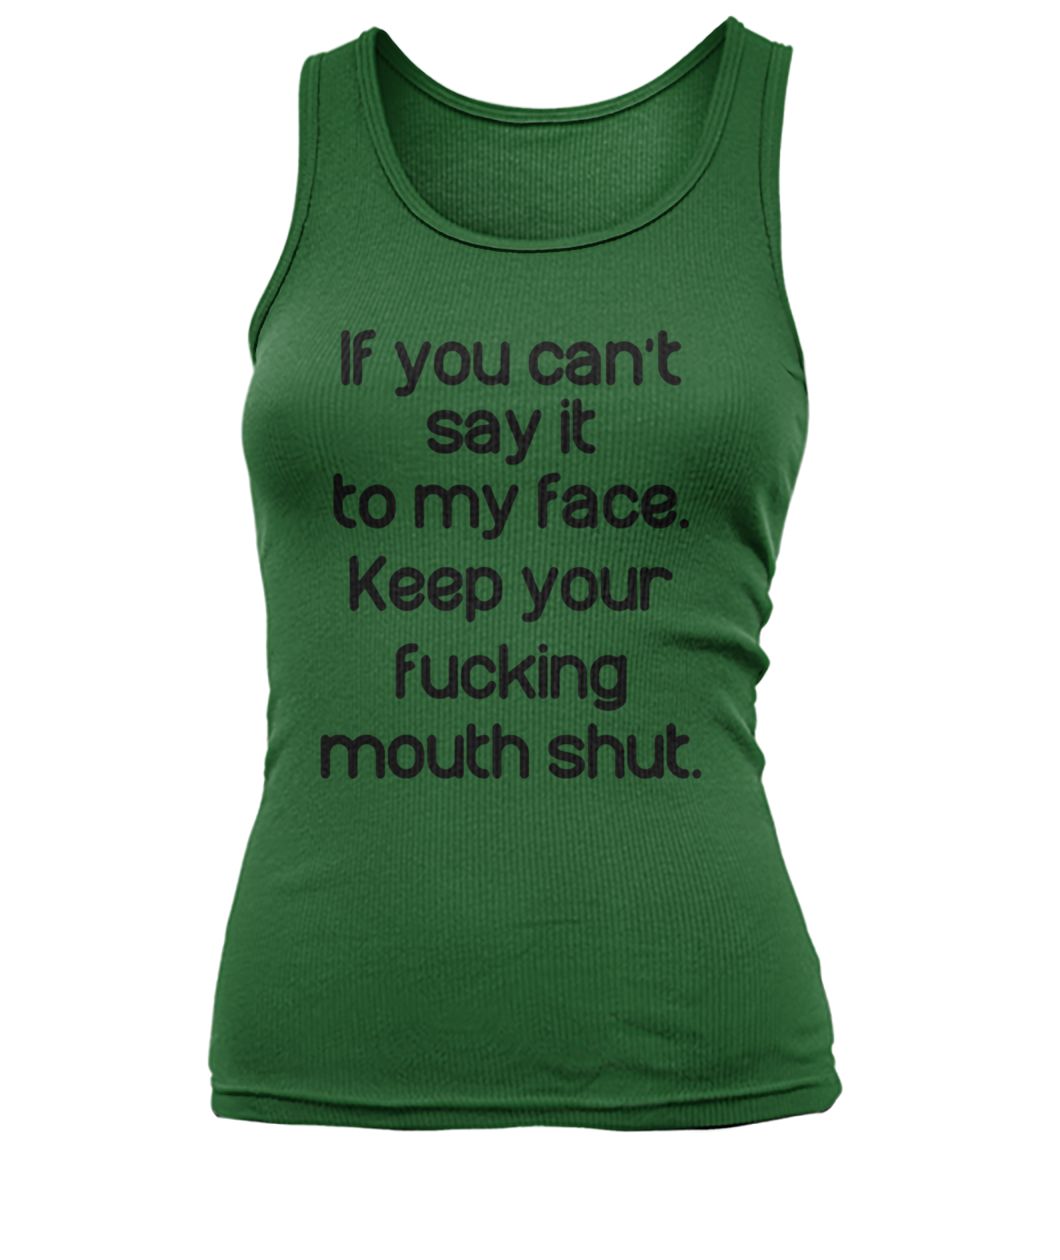 If you can't say it to my face keep your fucking mouth shut women's tank top